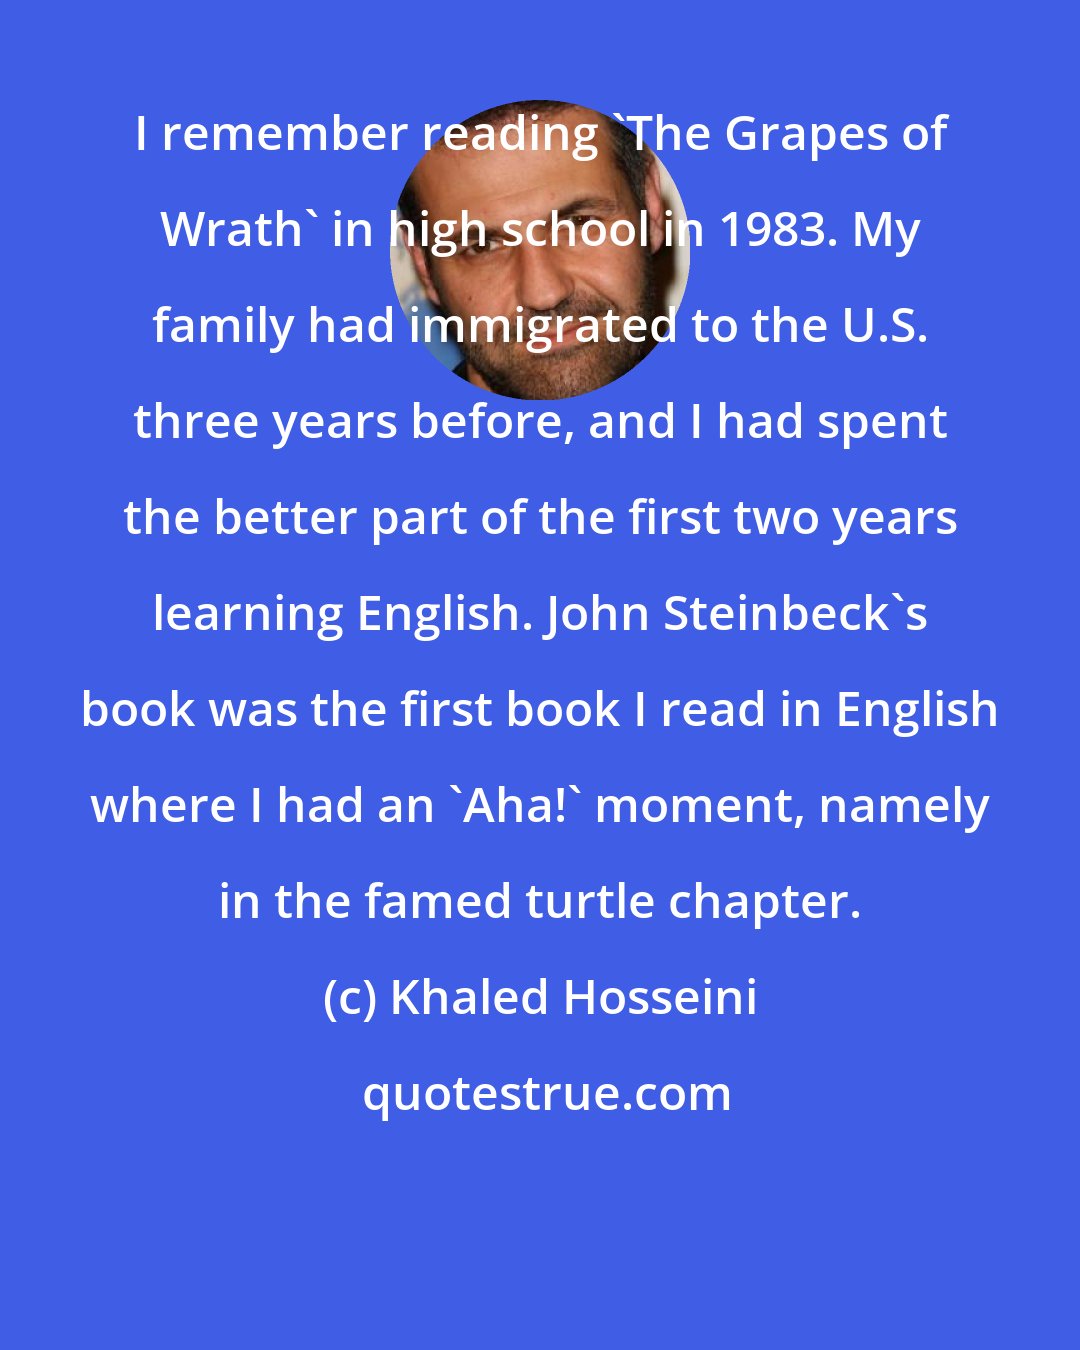 Khaled Hosseini: I remember reading 'The Grapes of Wrath' in high school in 1983. My family had immigrated to the U.S. three years before, and I had spent the better part of the first two years learning English. John Steinbeck's book was the first book I read in English where I had an 'Aha!' moment, namely in the famed turtle chapter.